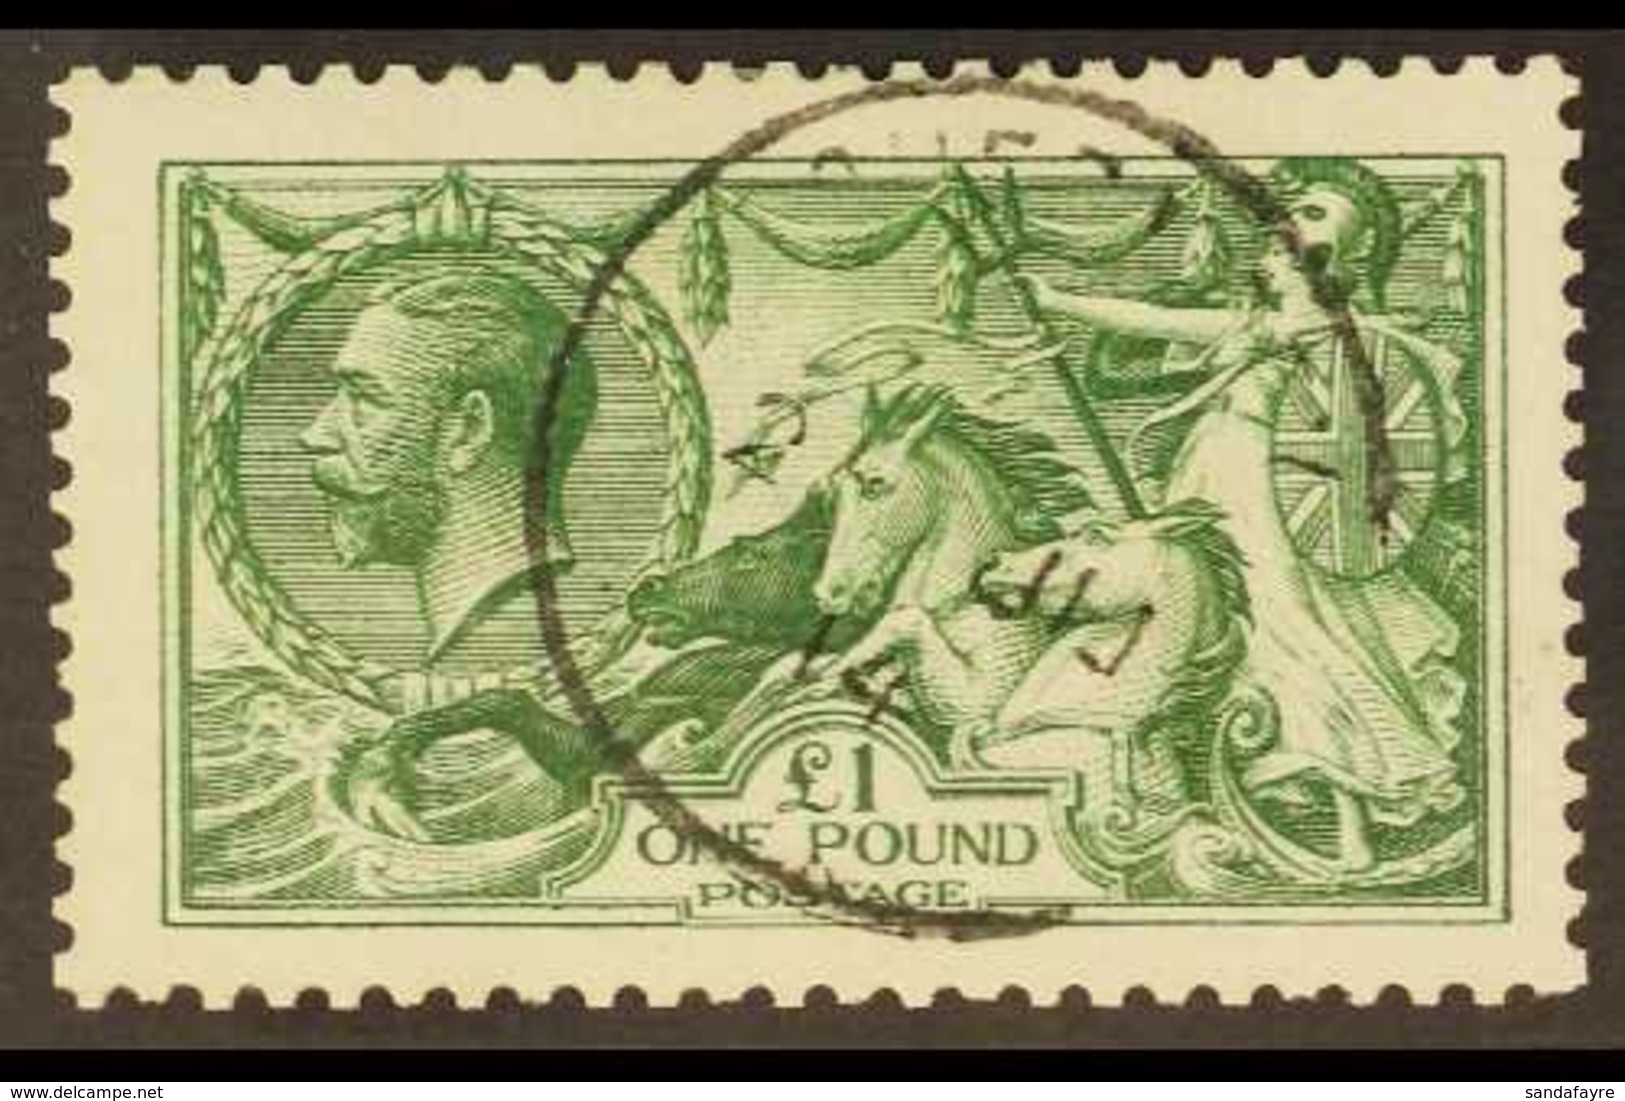 1913 £1 Green, Waterlow Seahorse, SG 403, Superb Used , Well Centred With Central Cds Cancel. A Gem! For More Images, Pl - Unclassified